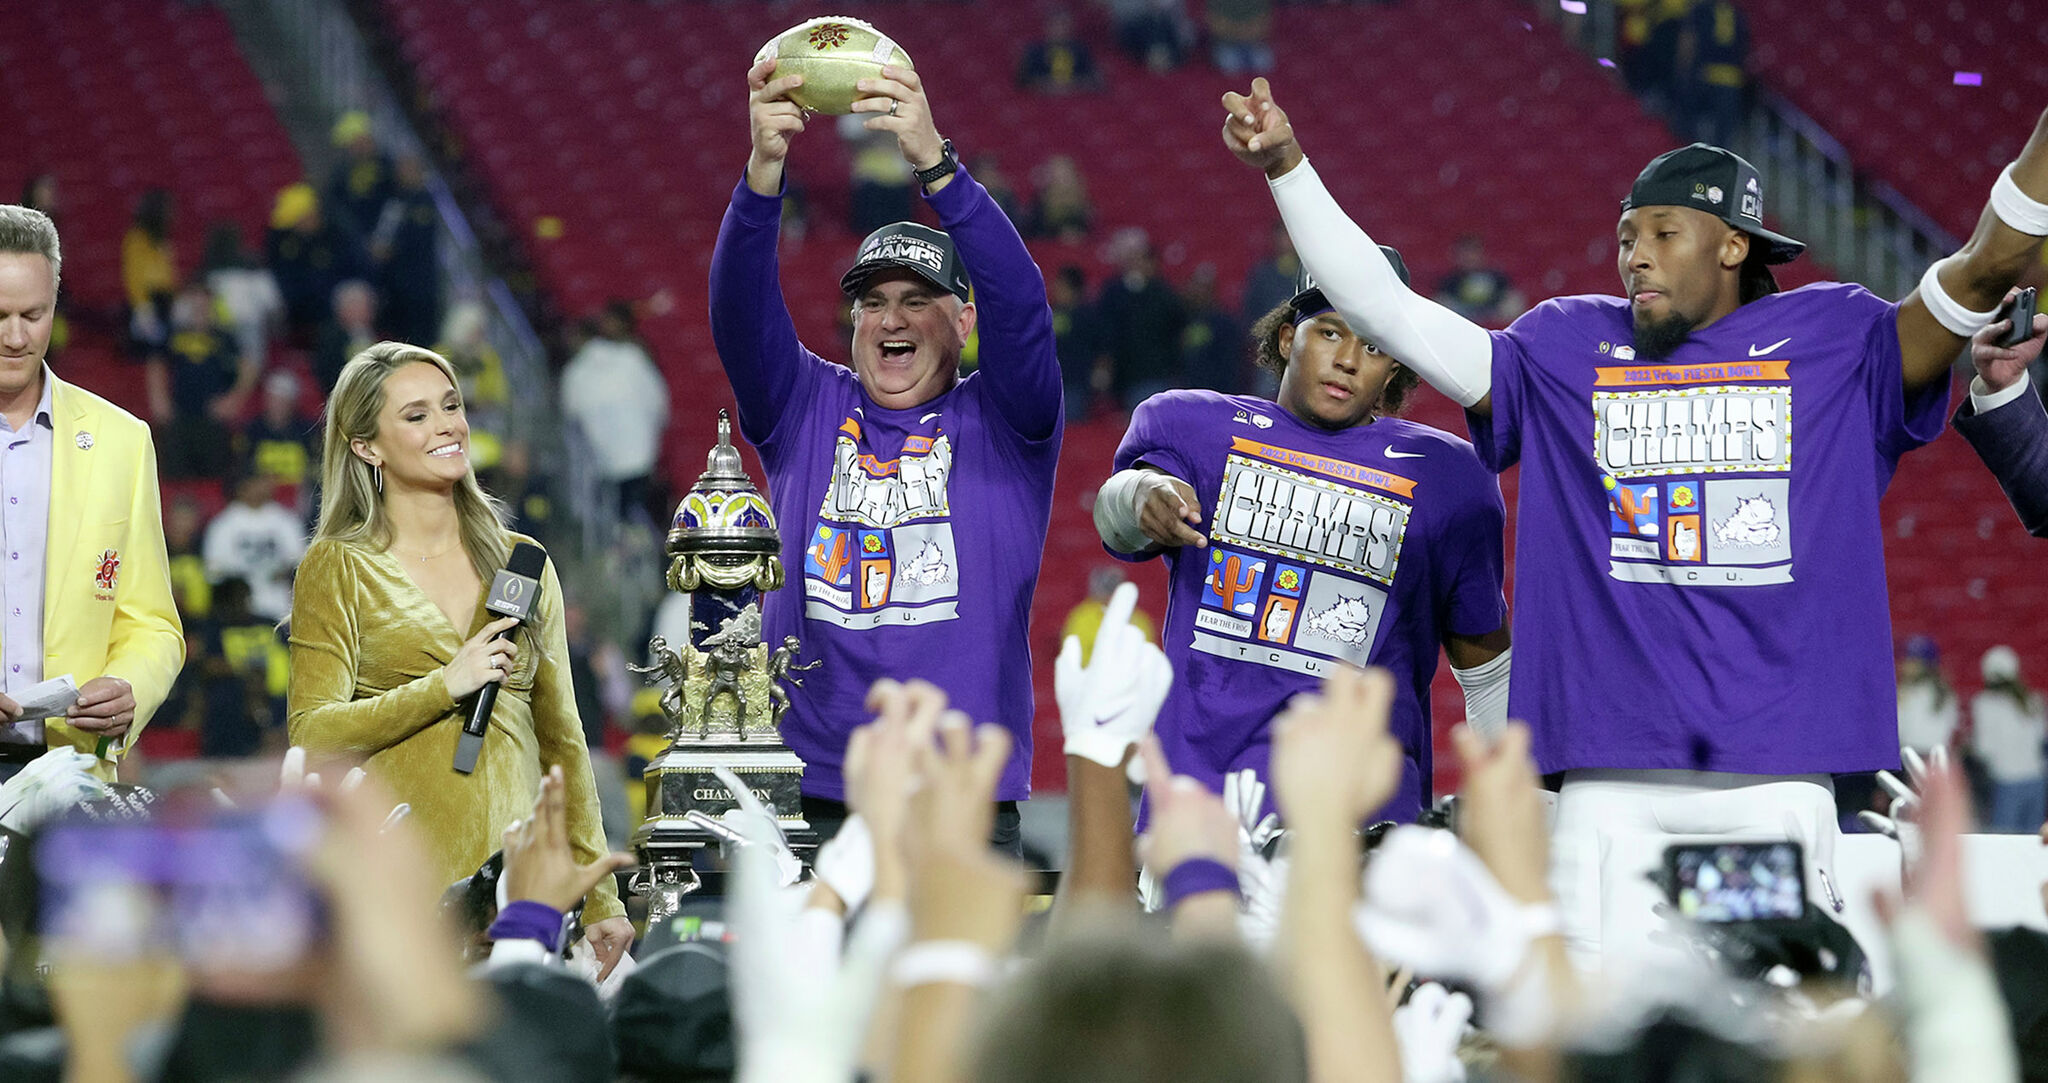 No. 2 Michigan and No. 3 TCU to Face Off in 2022 College Football Playoff  Semifinal at the Vrbo Fiesta Bowl - Fiesta Bowl